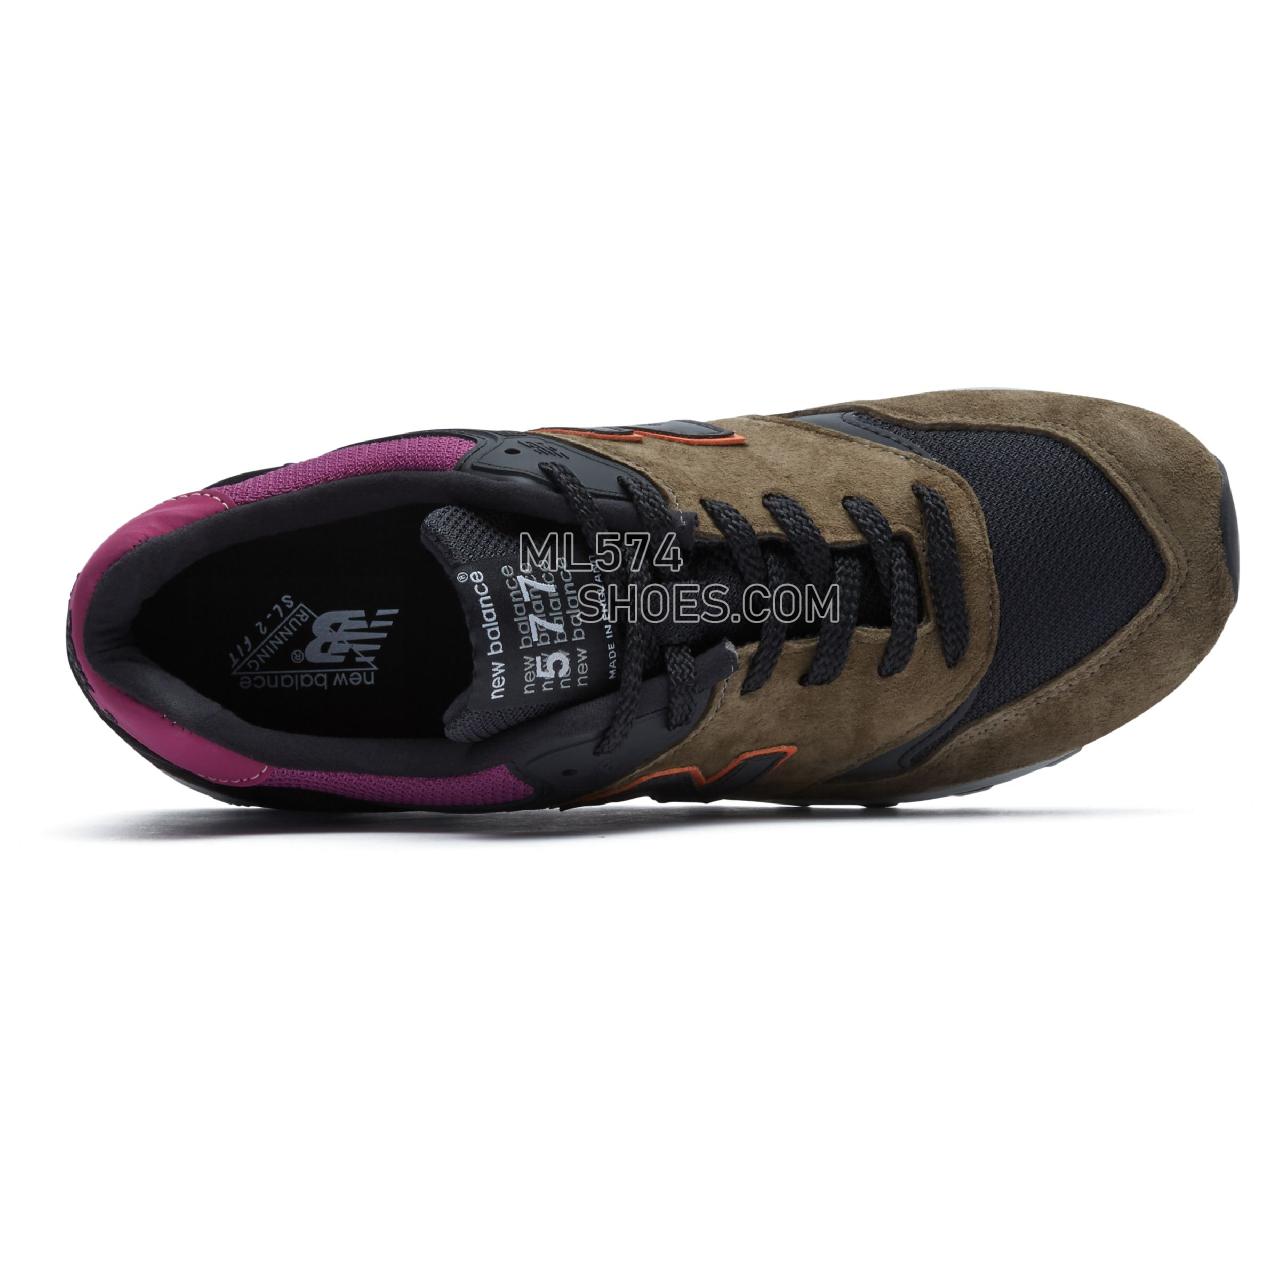 New Balance Made in UK 577 - Men's Made in UK 577 ML577V1-26190-M - Black with Khaki and Pink - M577KPO